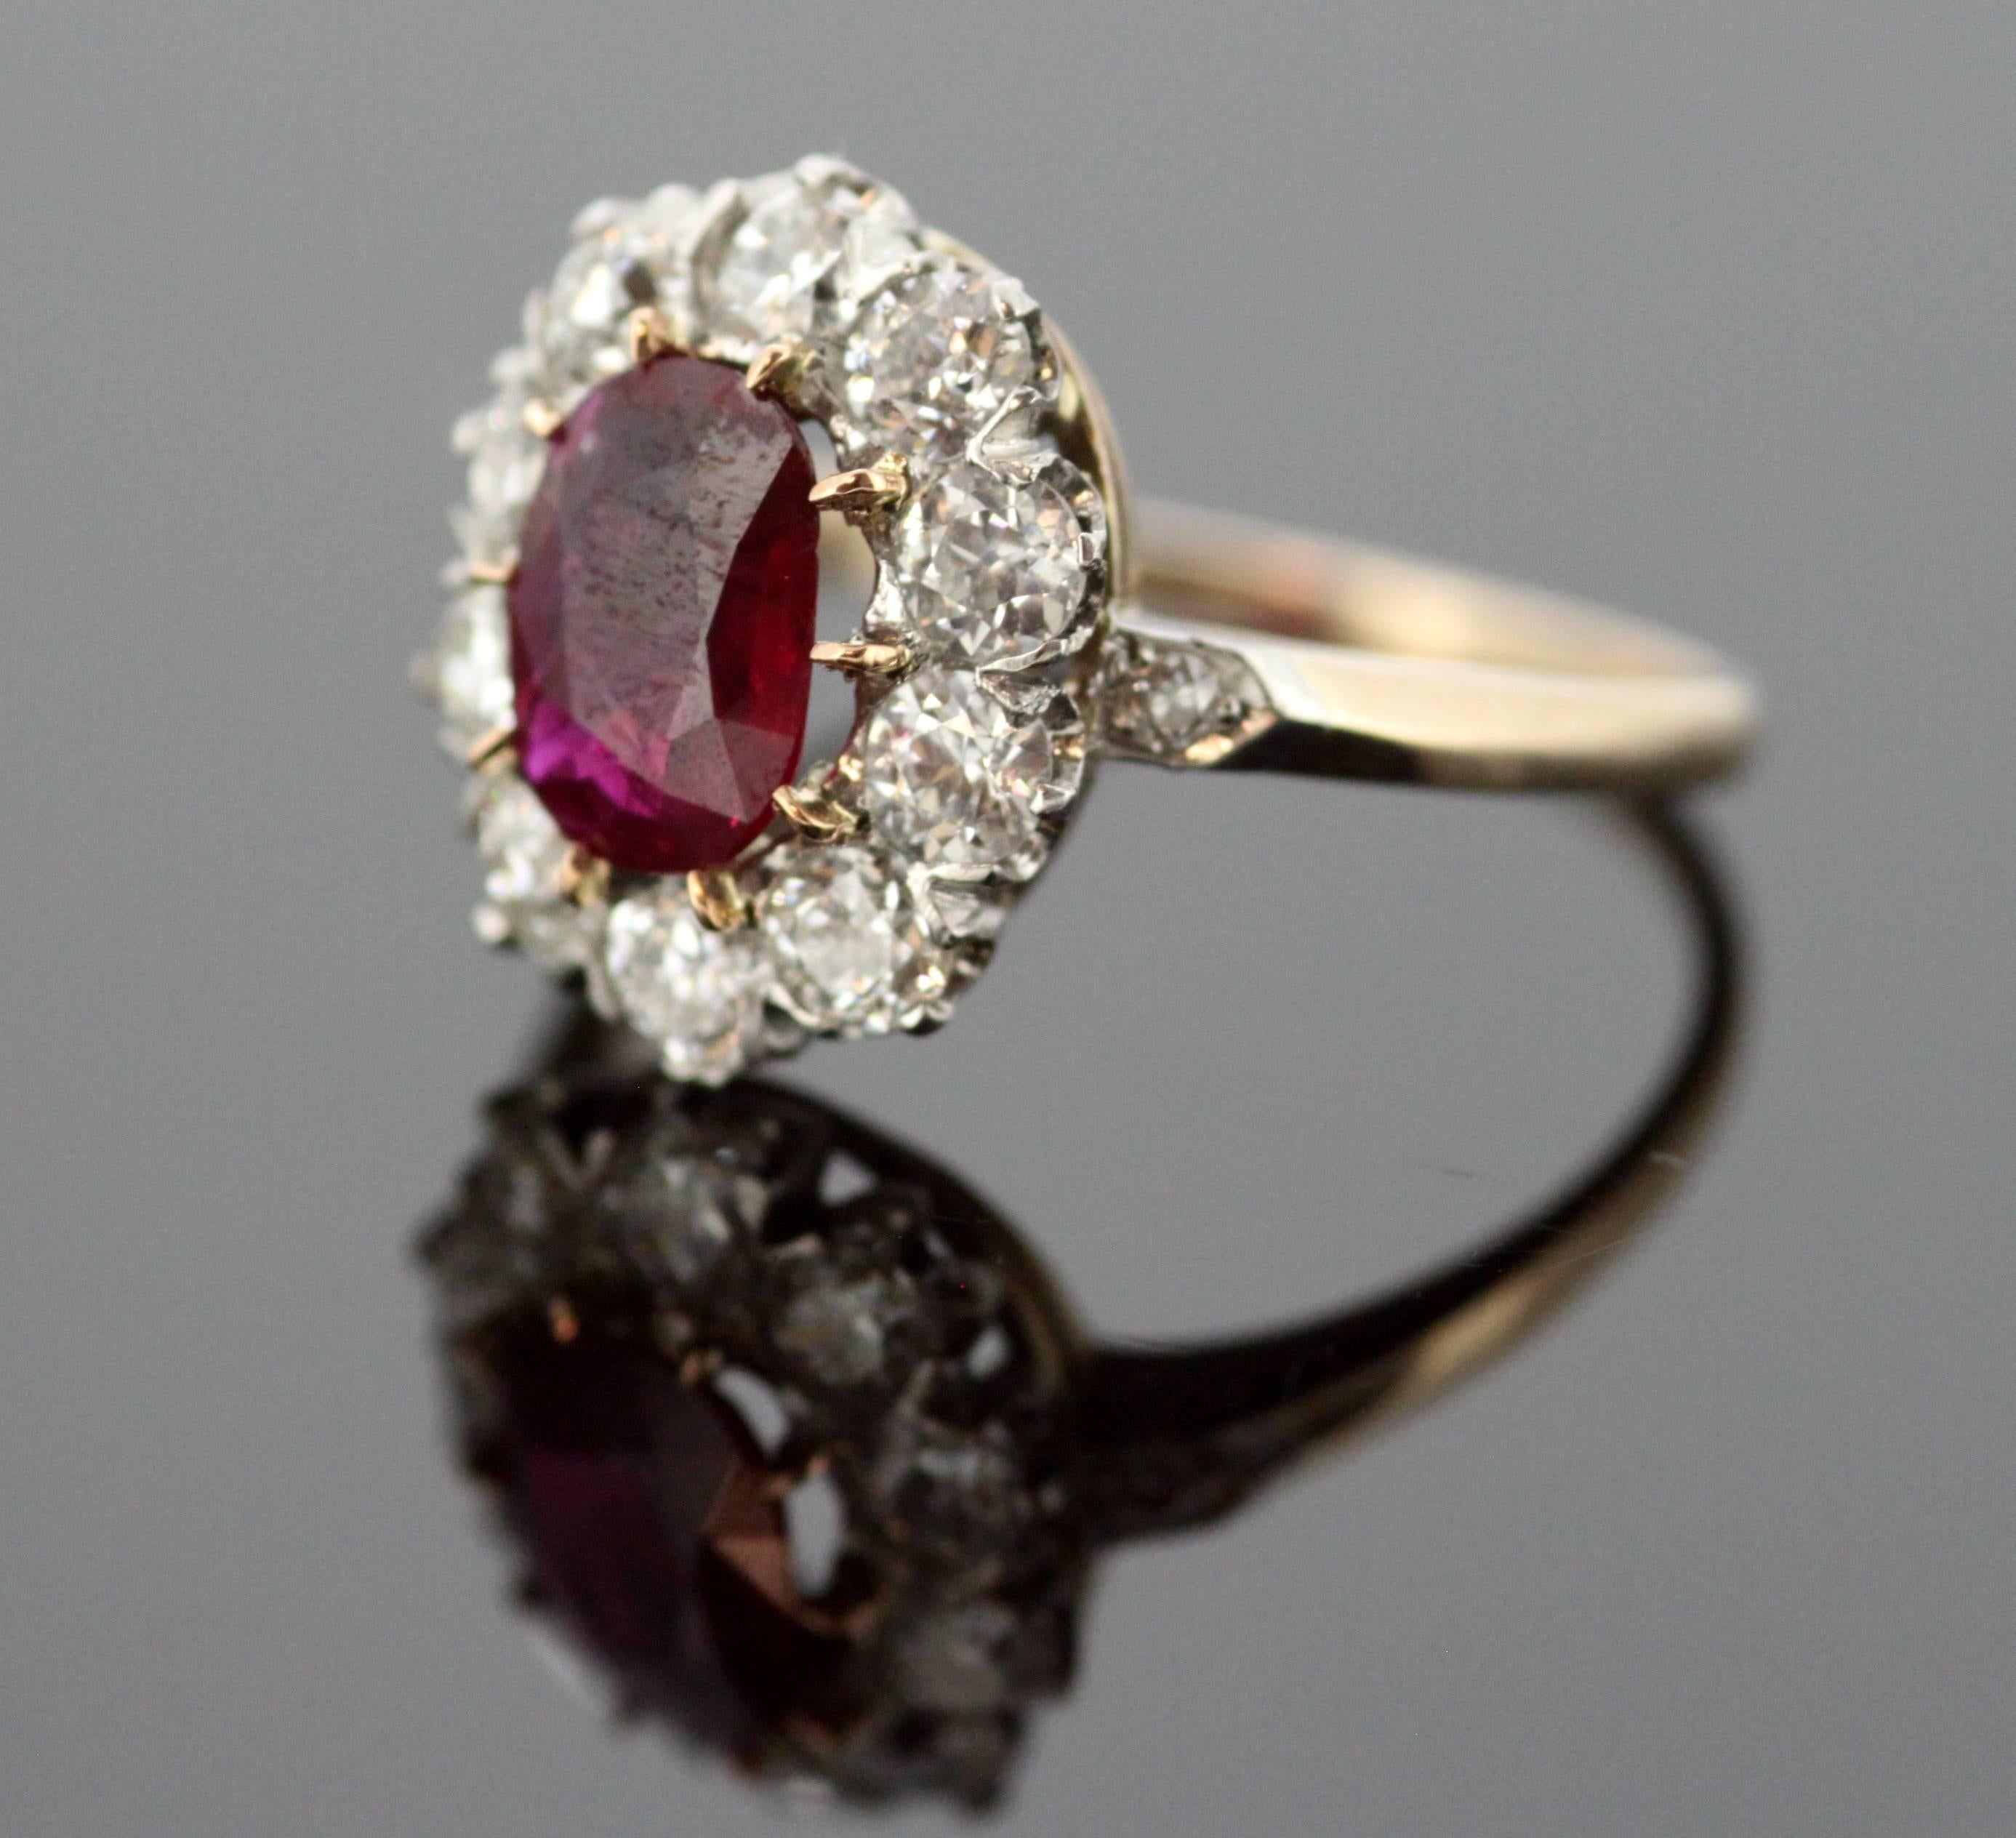 Vintage 18K yellow gold ladies ring with oval cut ruby (1 CT) and diamonds (0.72 CT Total)
Hallmarked 18K
Circa.1970s


Dimensions -
Ring Size : 2.5 x 2 x 1.5 cm
Finger Size : (UK) = O (US) = 7 1/2 (EU) = 55 1/4
Weight : 4 grams total

Ruby - 
Cut :